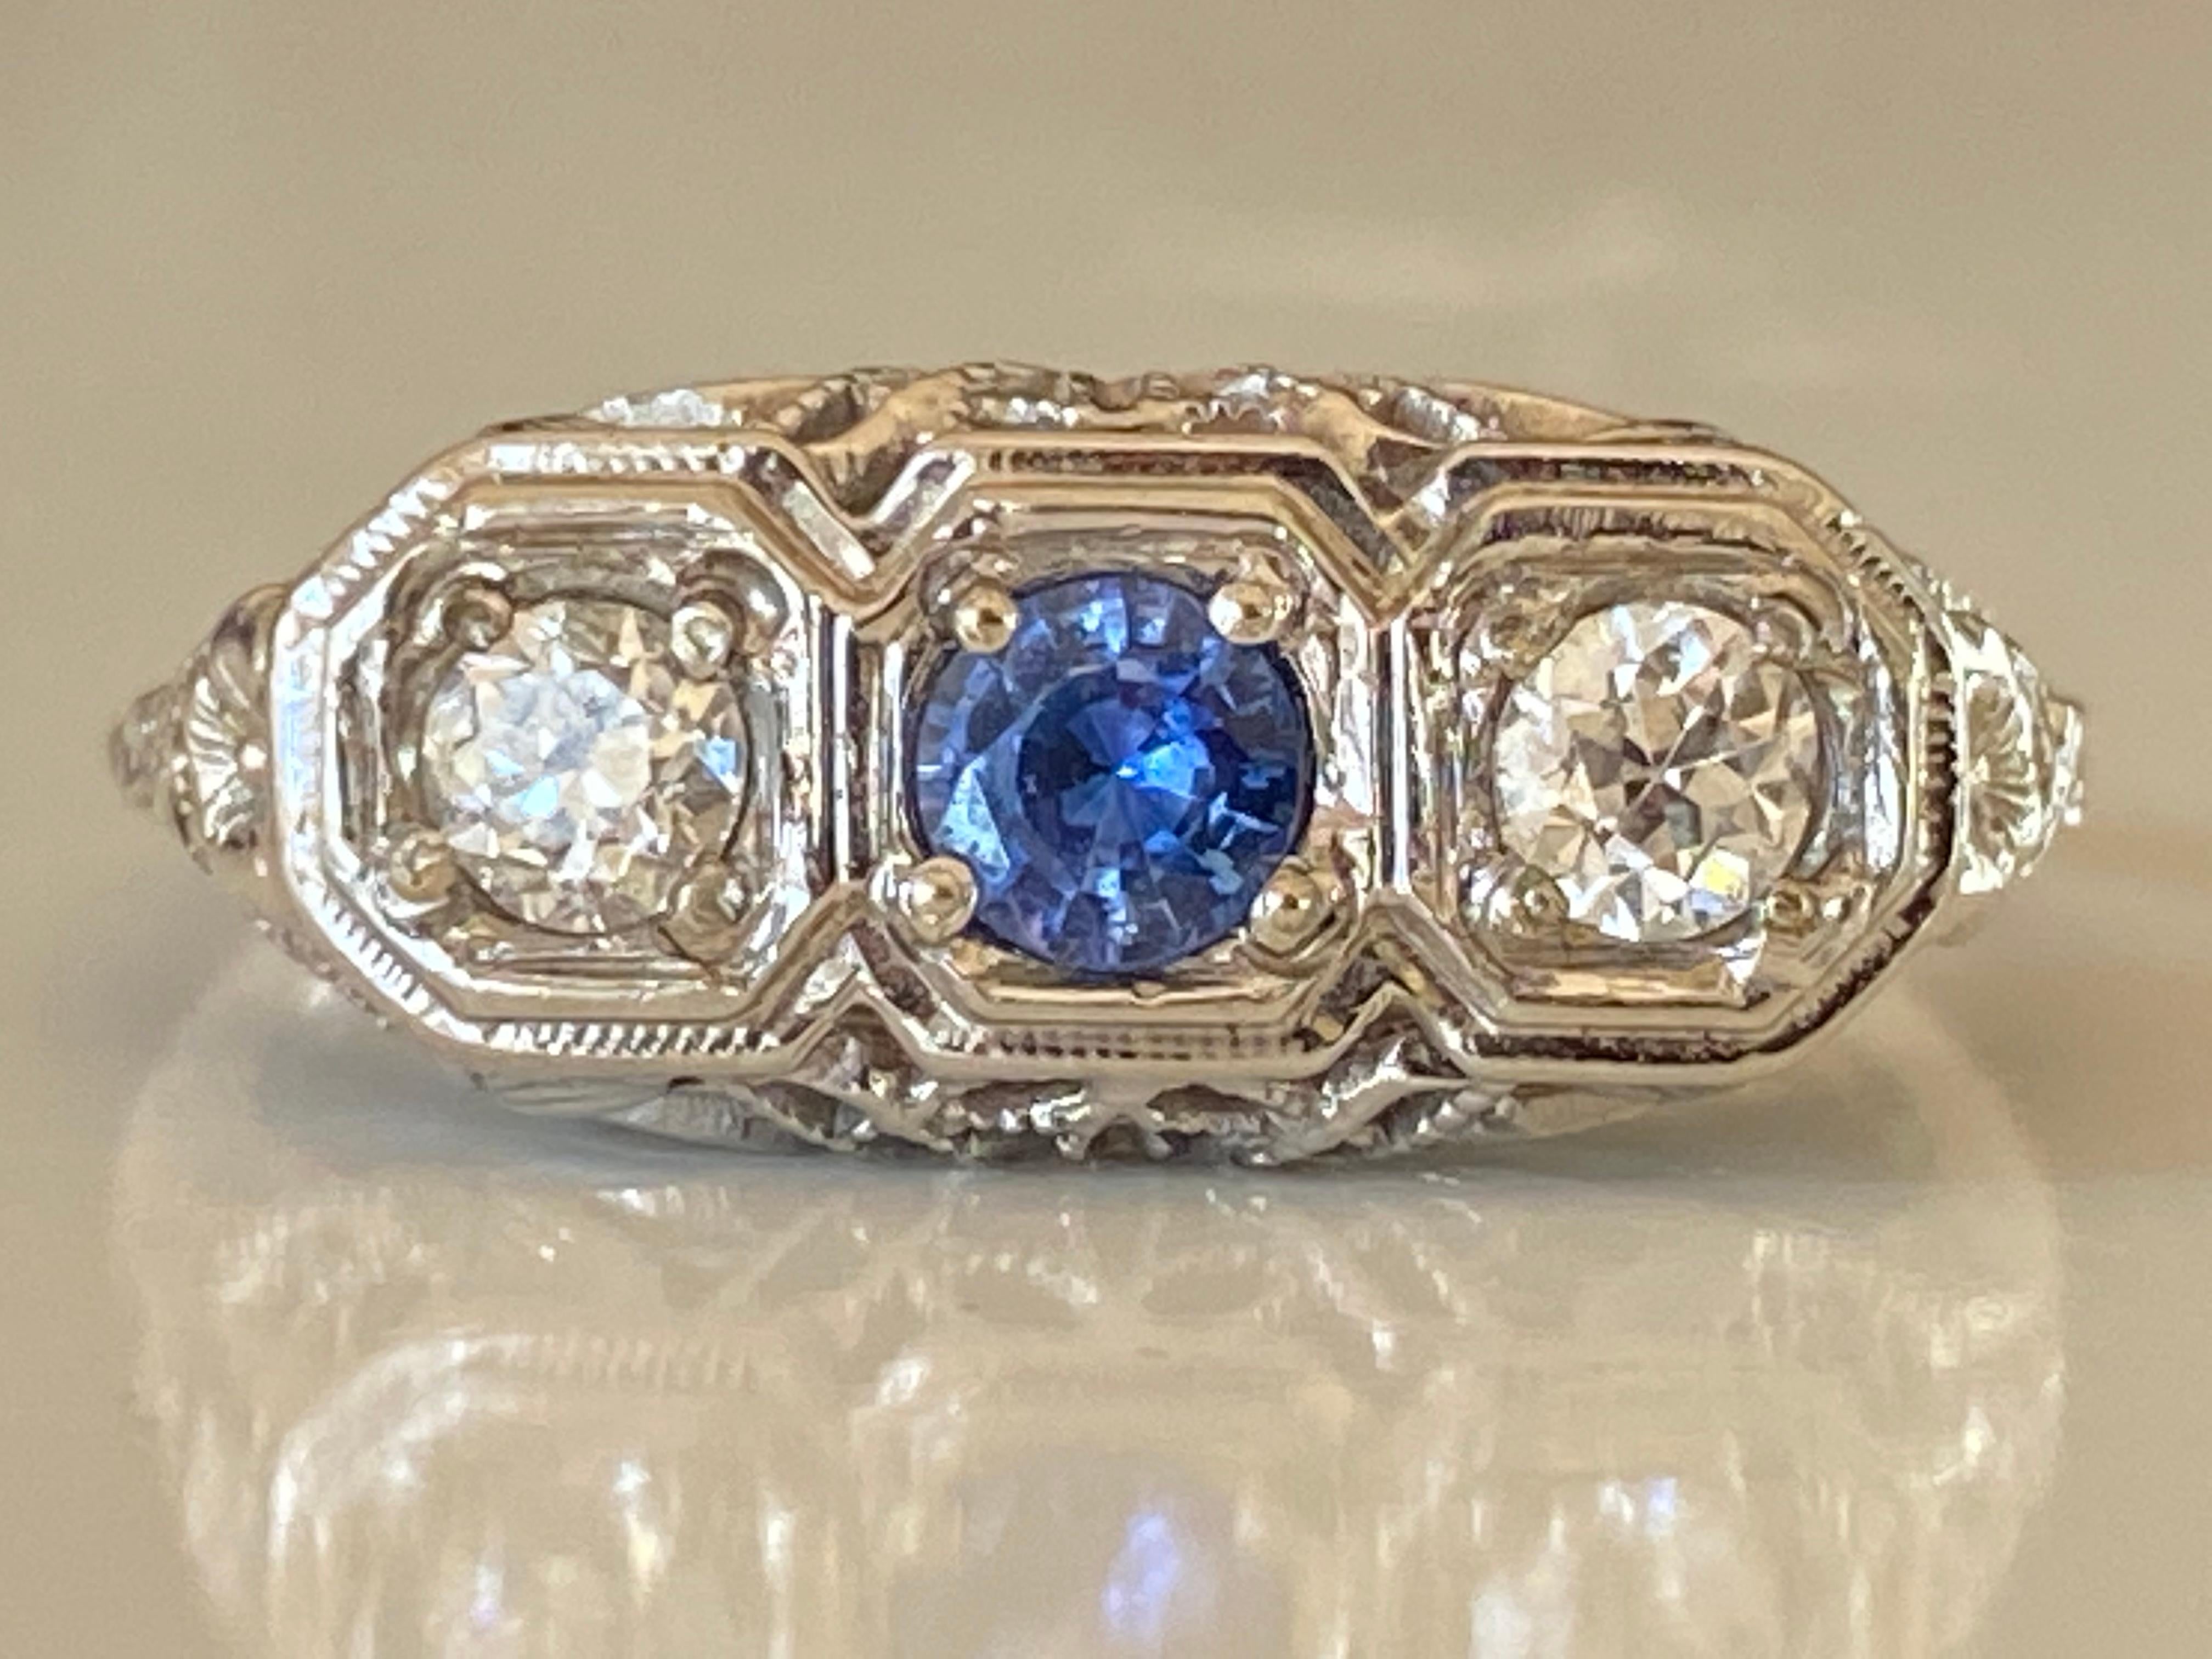 This antique Art Deco three-stone ring handcrafted in 18kt white gold features a stunning blue sapphire center stone flanked by two Old European cut diamonds totaling 0.30 carats, H color, SI clarity accented with fine filigree details and floral